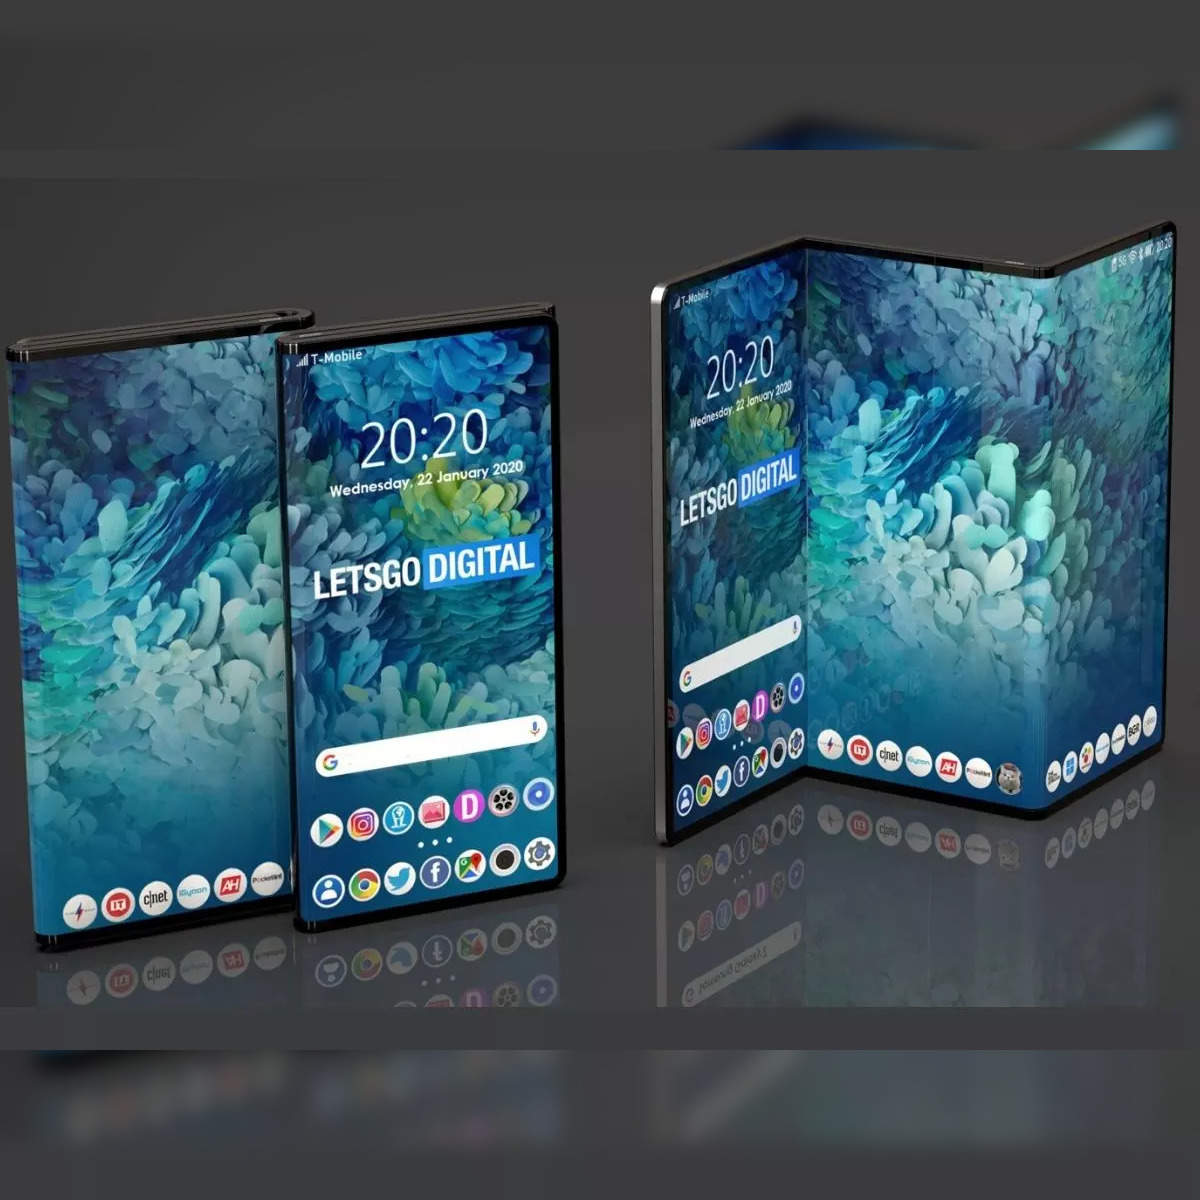 Samsung Galaxy Z Flip 3: Is it the foldable phone for the masses? - CNET